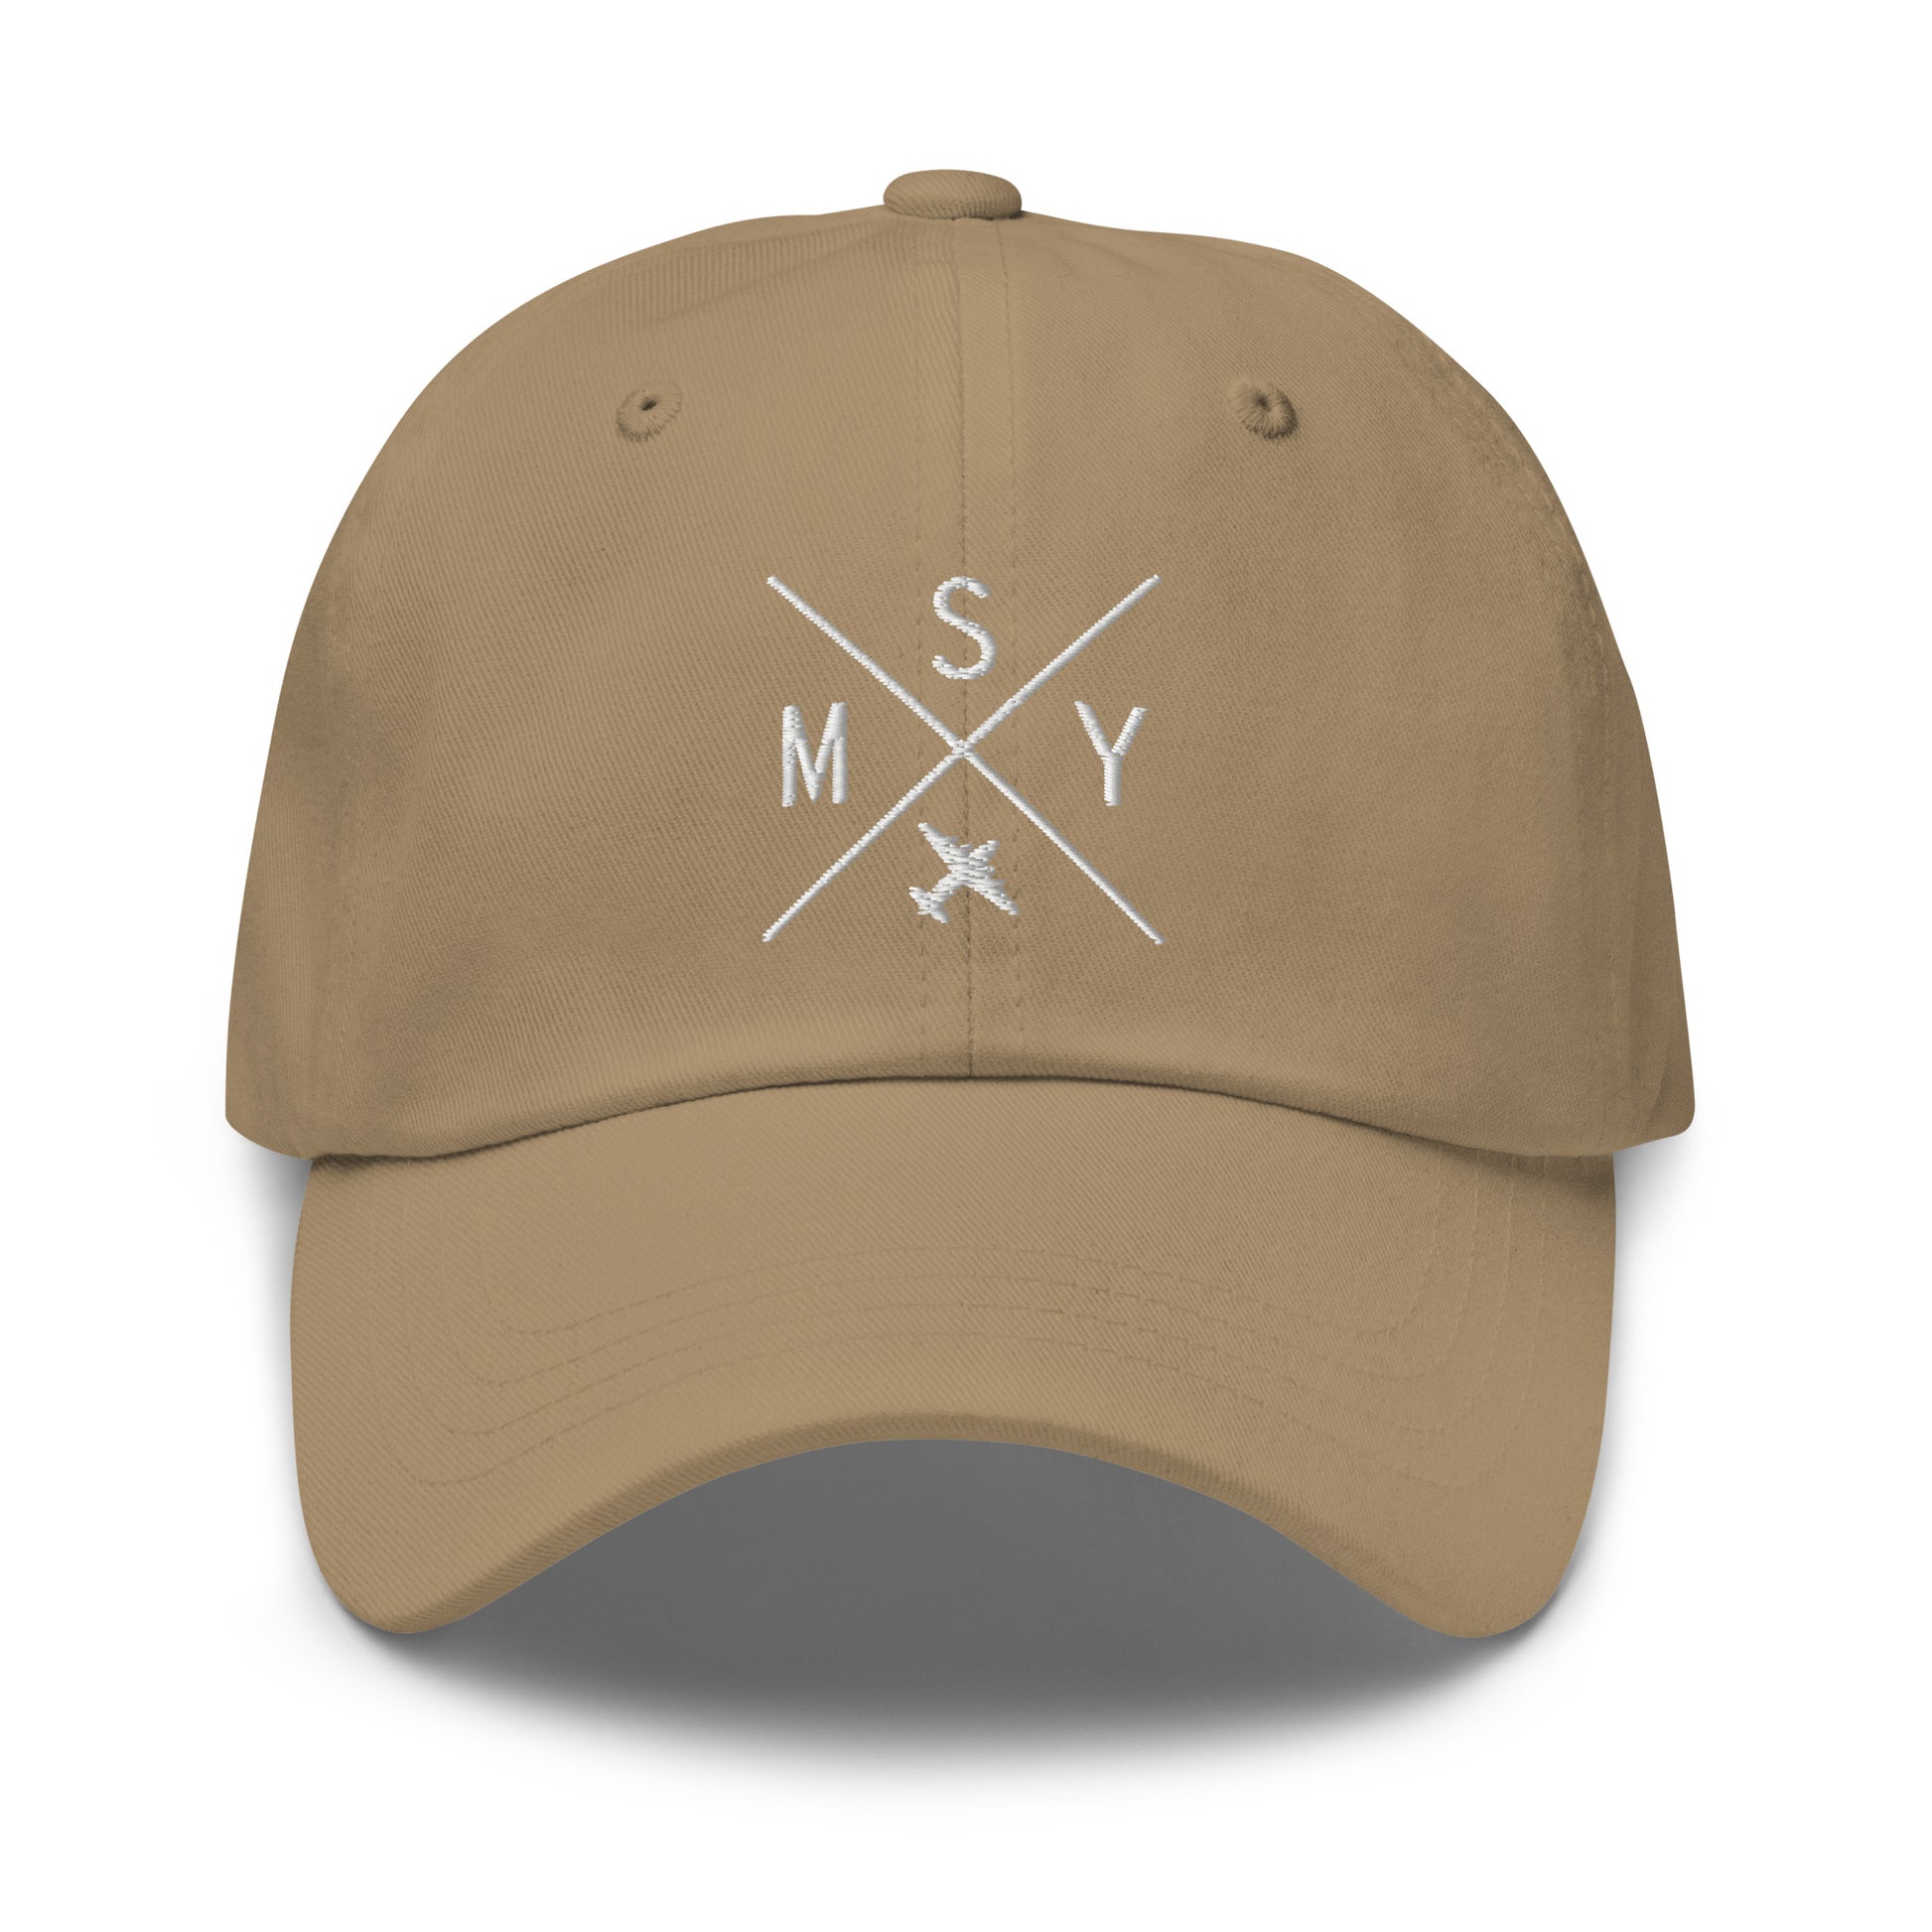 Crossed-X Dad Hat - White • MSY New Orleans • YHM Designs - Image 22